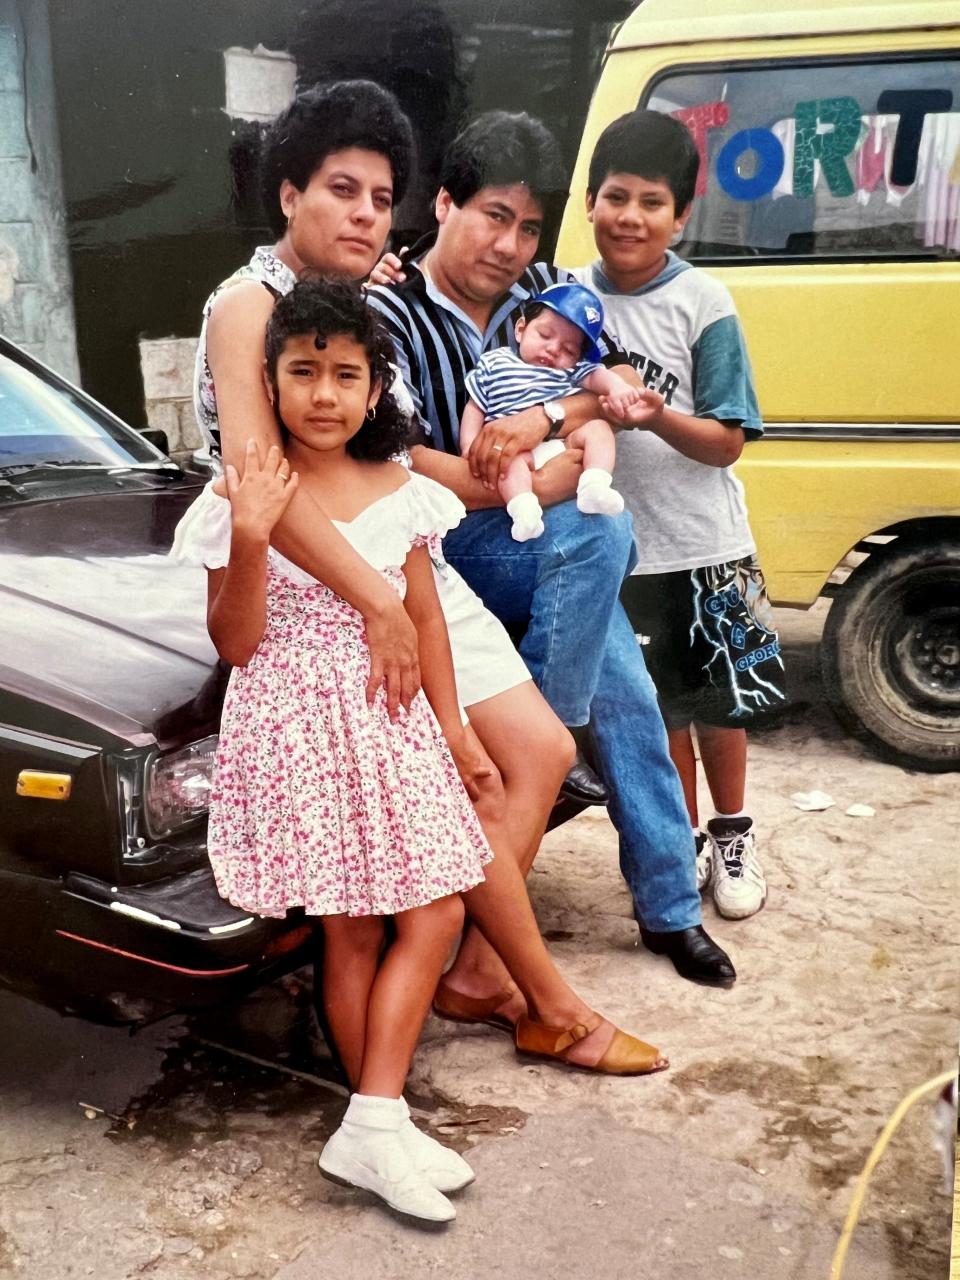 A 1999 picture of Claudia de Mejia and her family in their rural village in Guatemala. From left, Edith, then 11, de Mejia, her husband, Marco, their youngest, Luis, then three months old, and their oldest, also named Marco, then 13